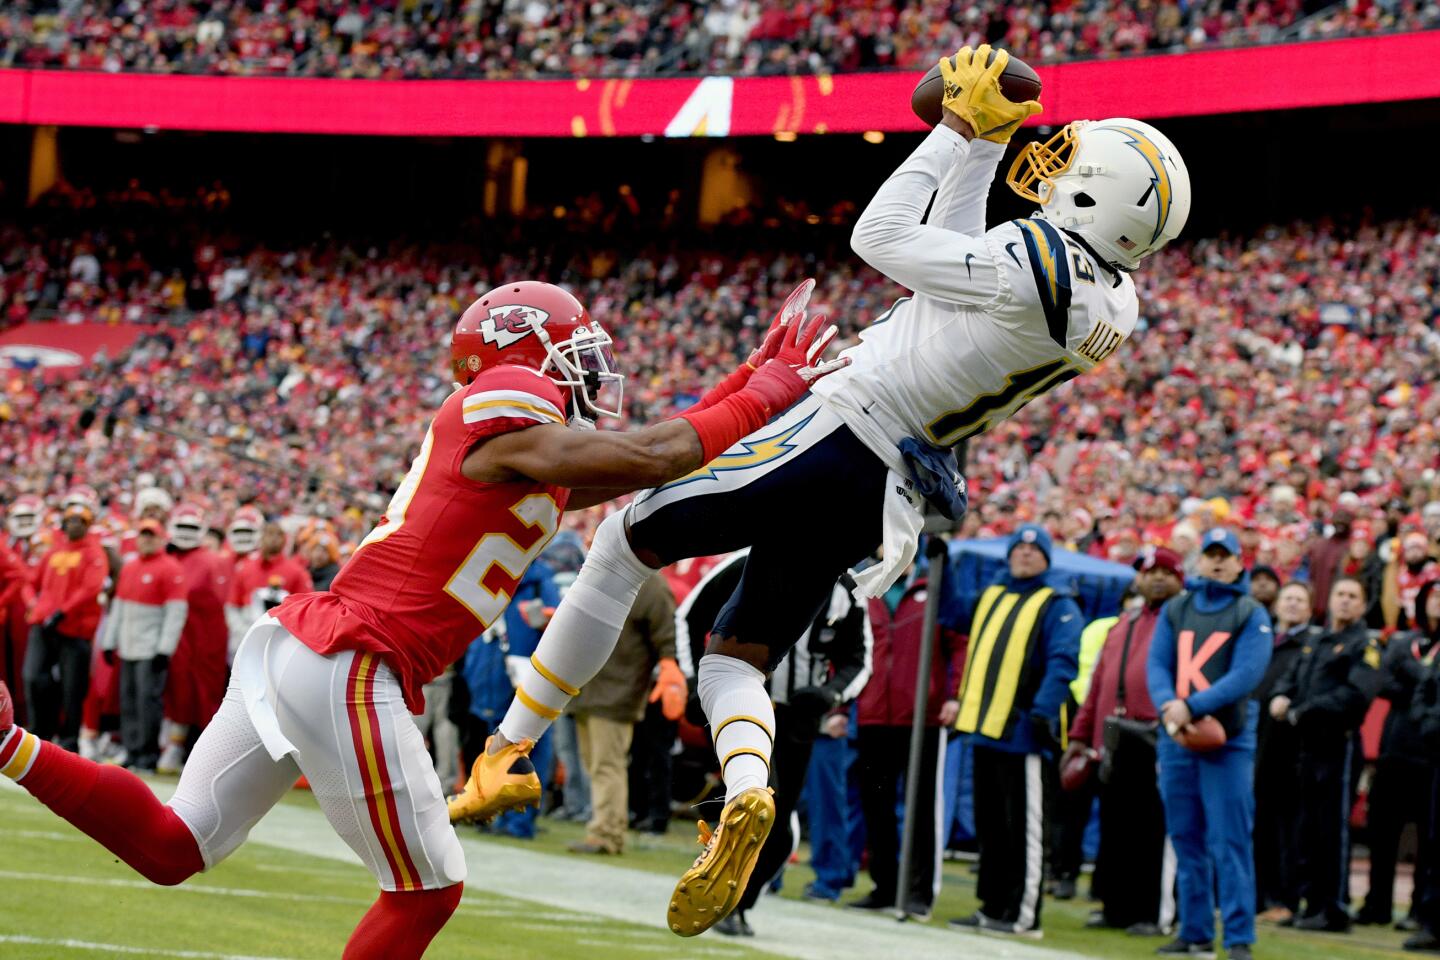 Chargers receiver Keenan Allen (13) makes a touchdown catch against Chiefs cornerback Kendall Fuller (29) during a game Dec. 29.